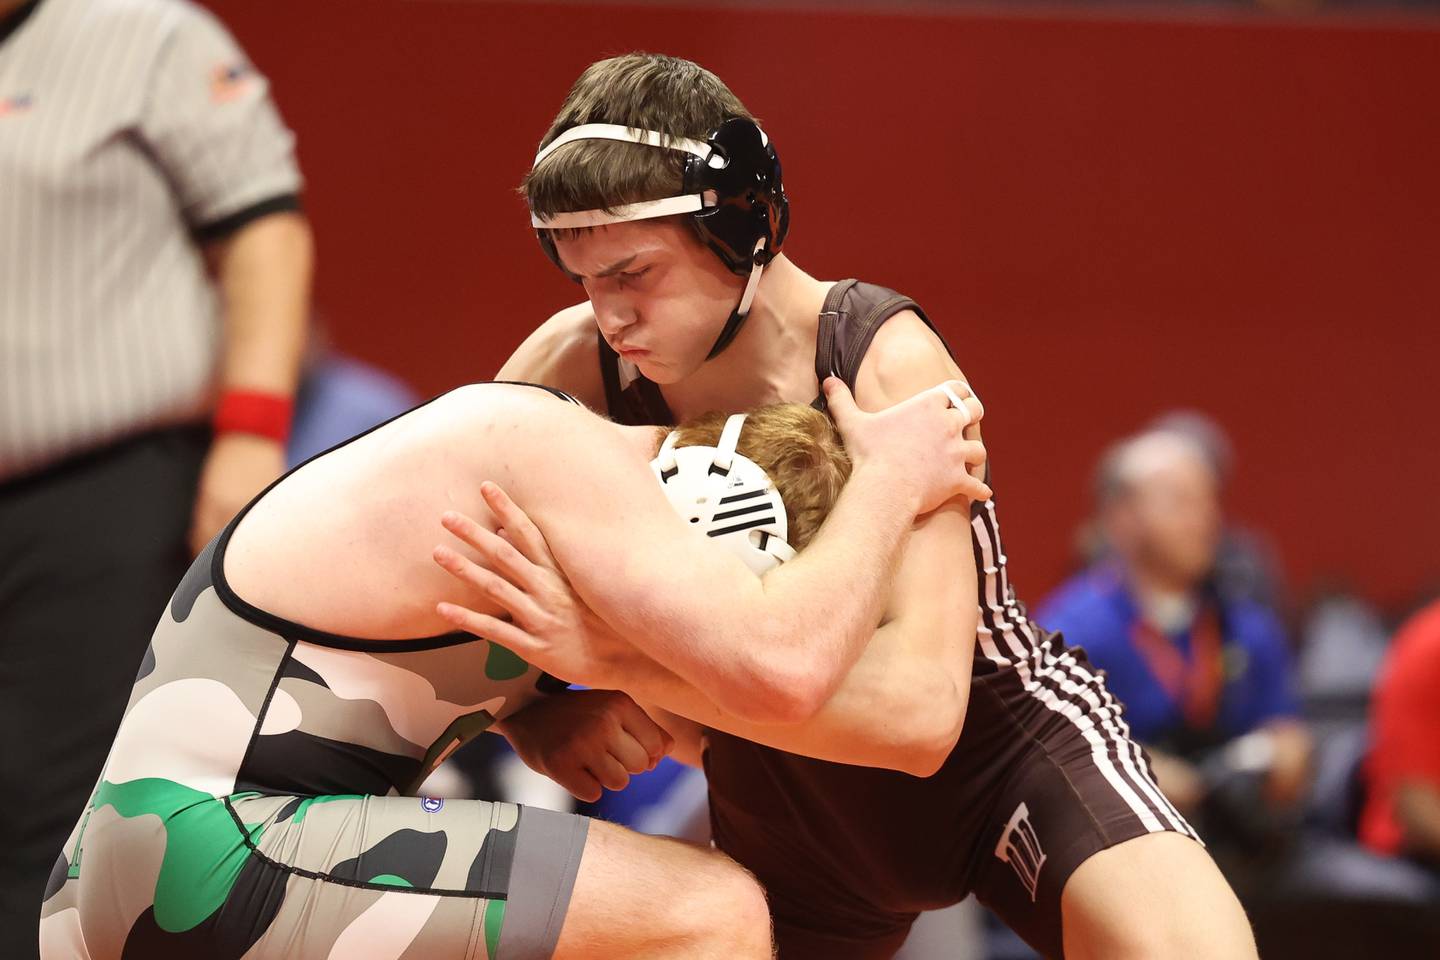 Joliet Catholic’s Nico Ronchetti works over Grays Lake Central’s Matty Jens in the 182-pound Class 2A championship match on Saturday, Feb. 18, 2023 at State Farm Center in Champaign.